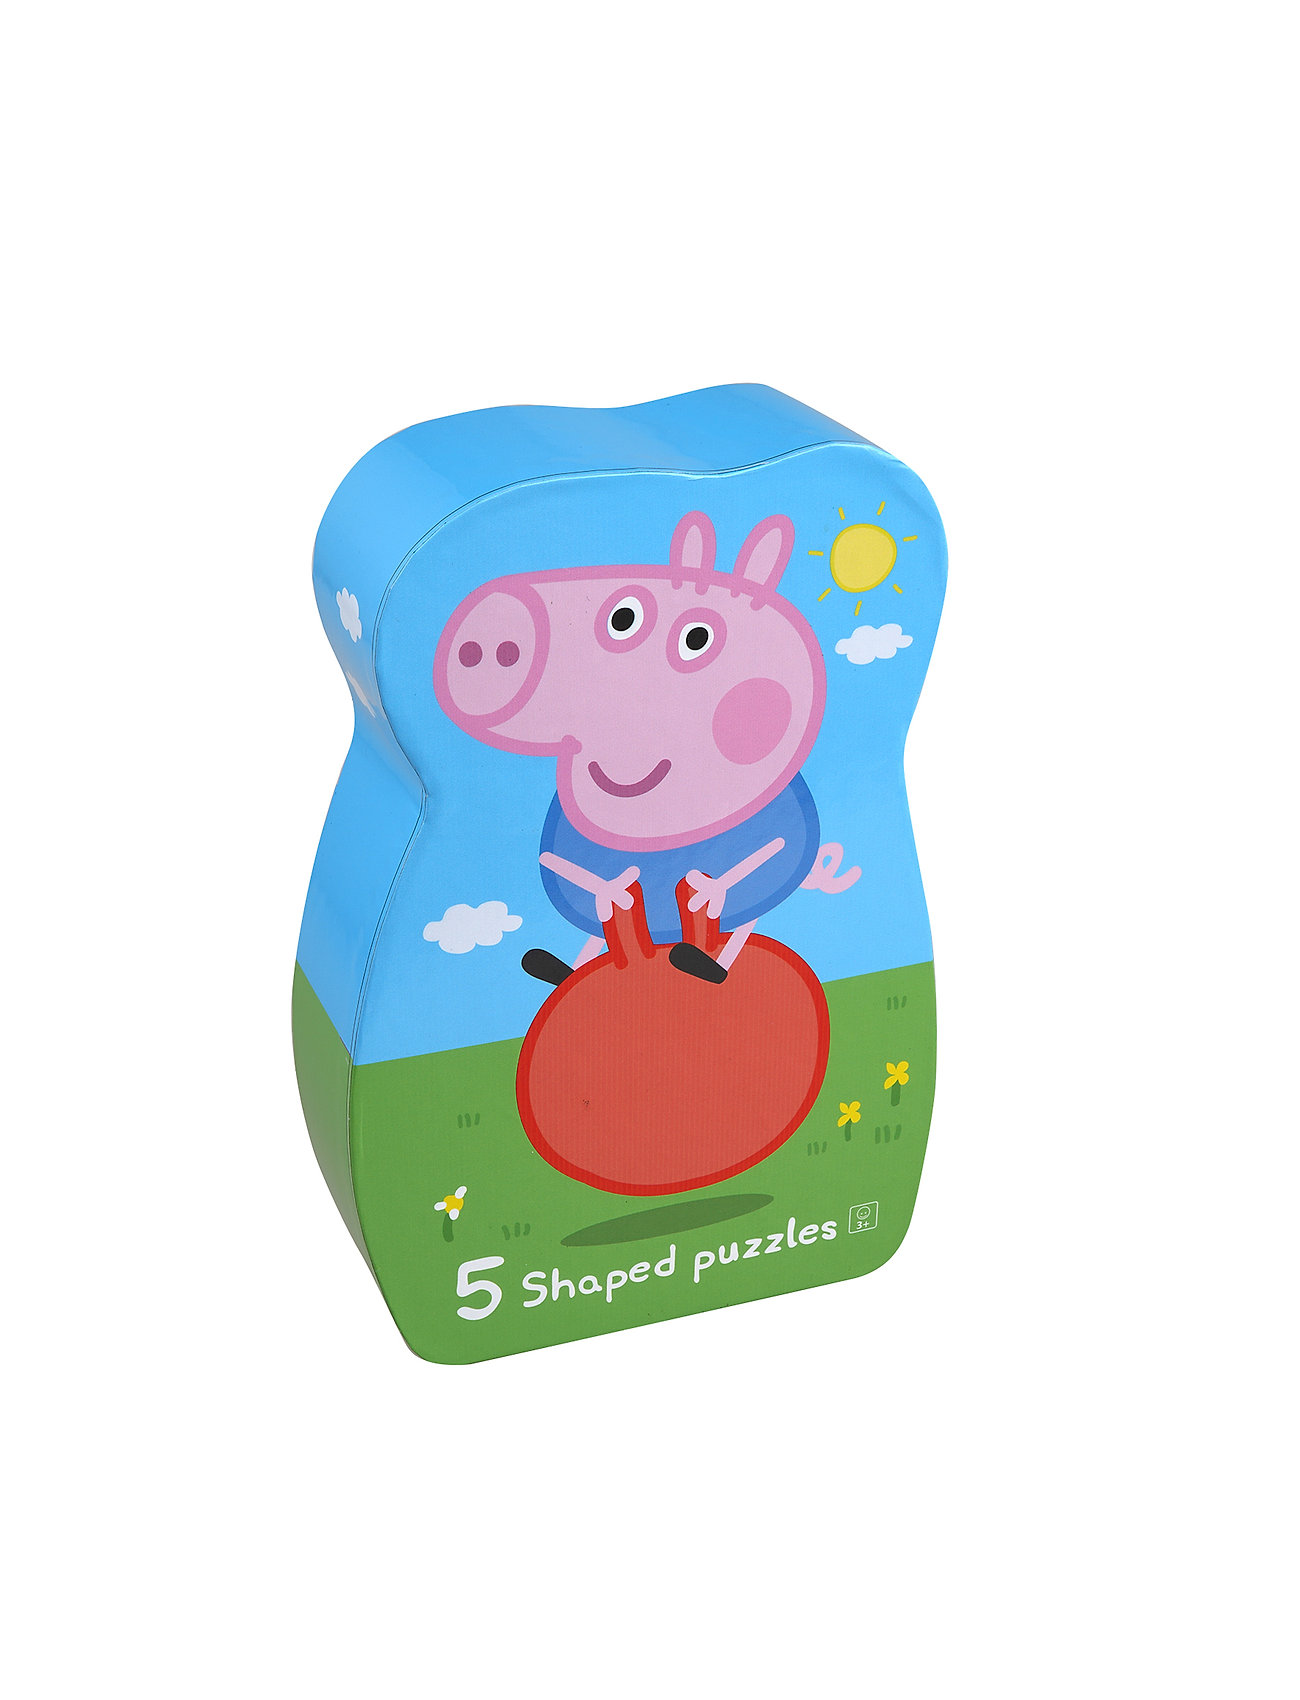 Peppa Pig Deco Puzzle George Toys Puzzles And Games Puzzles Classic Puzzles Multi/patterned Gurli Gris